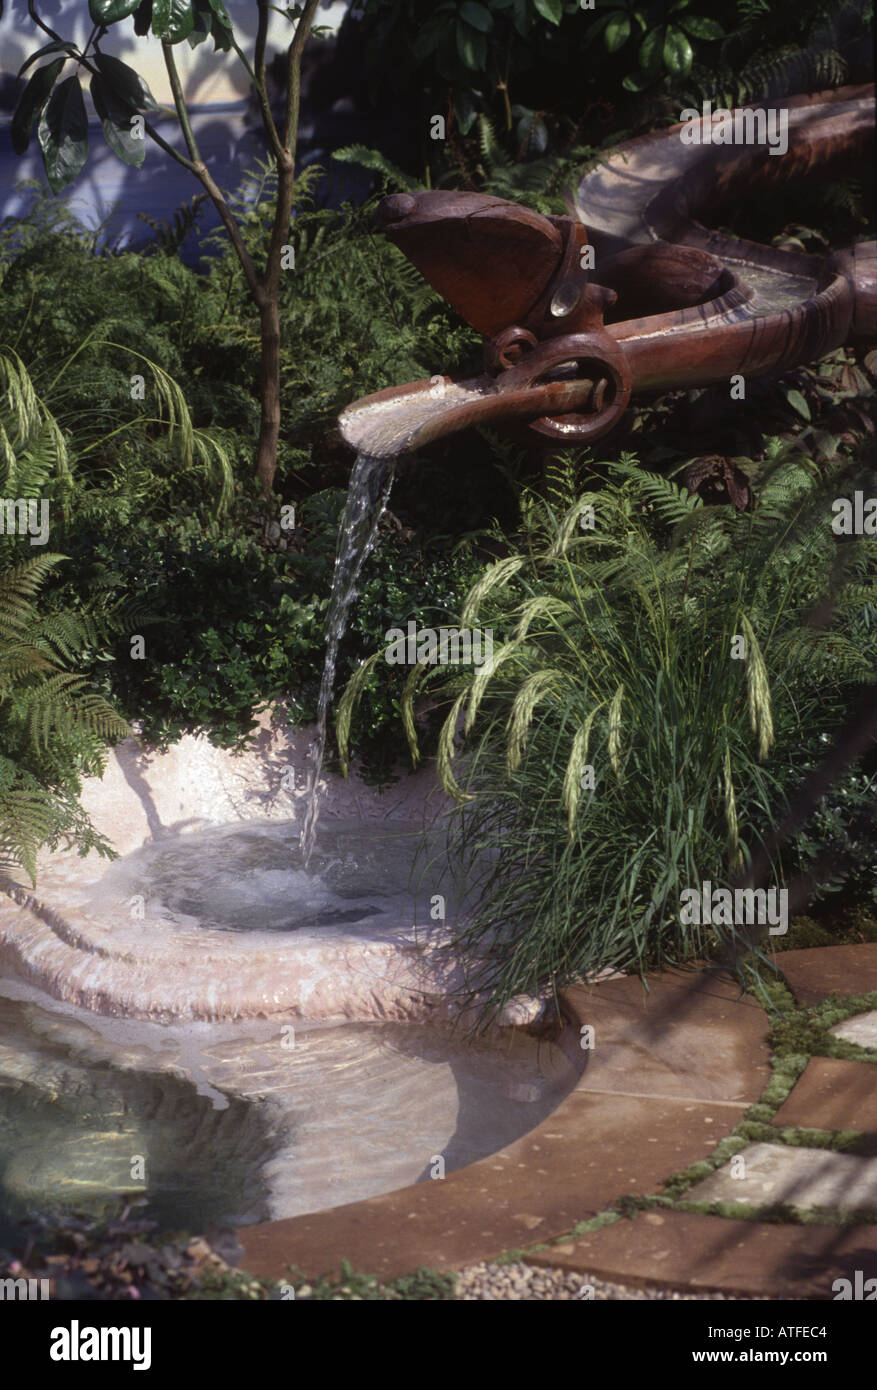 wooden water feature planted with ferns in the 100 pure new zealand